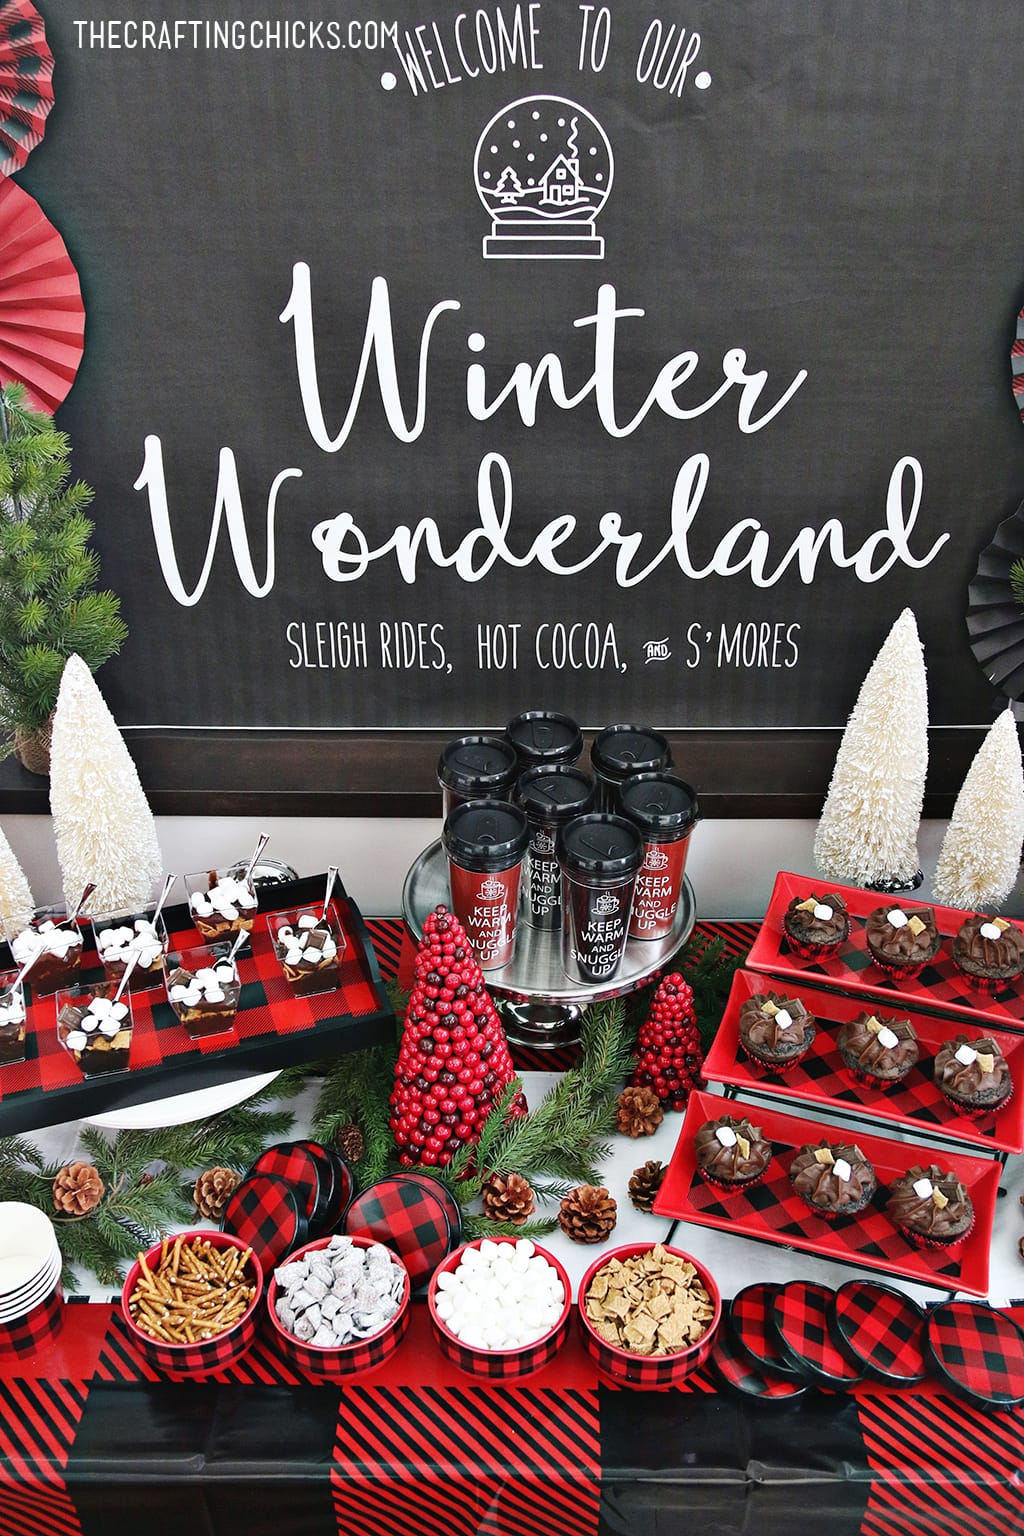 Add this Winter Wonderland Backdrop Printable to any winter party you throw. This large format printable is beautiful and will make the party table stand out.